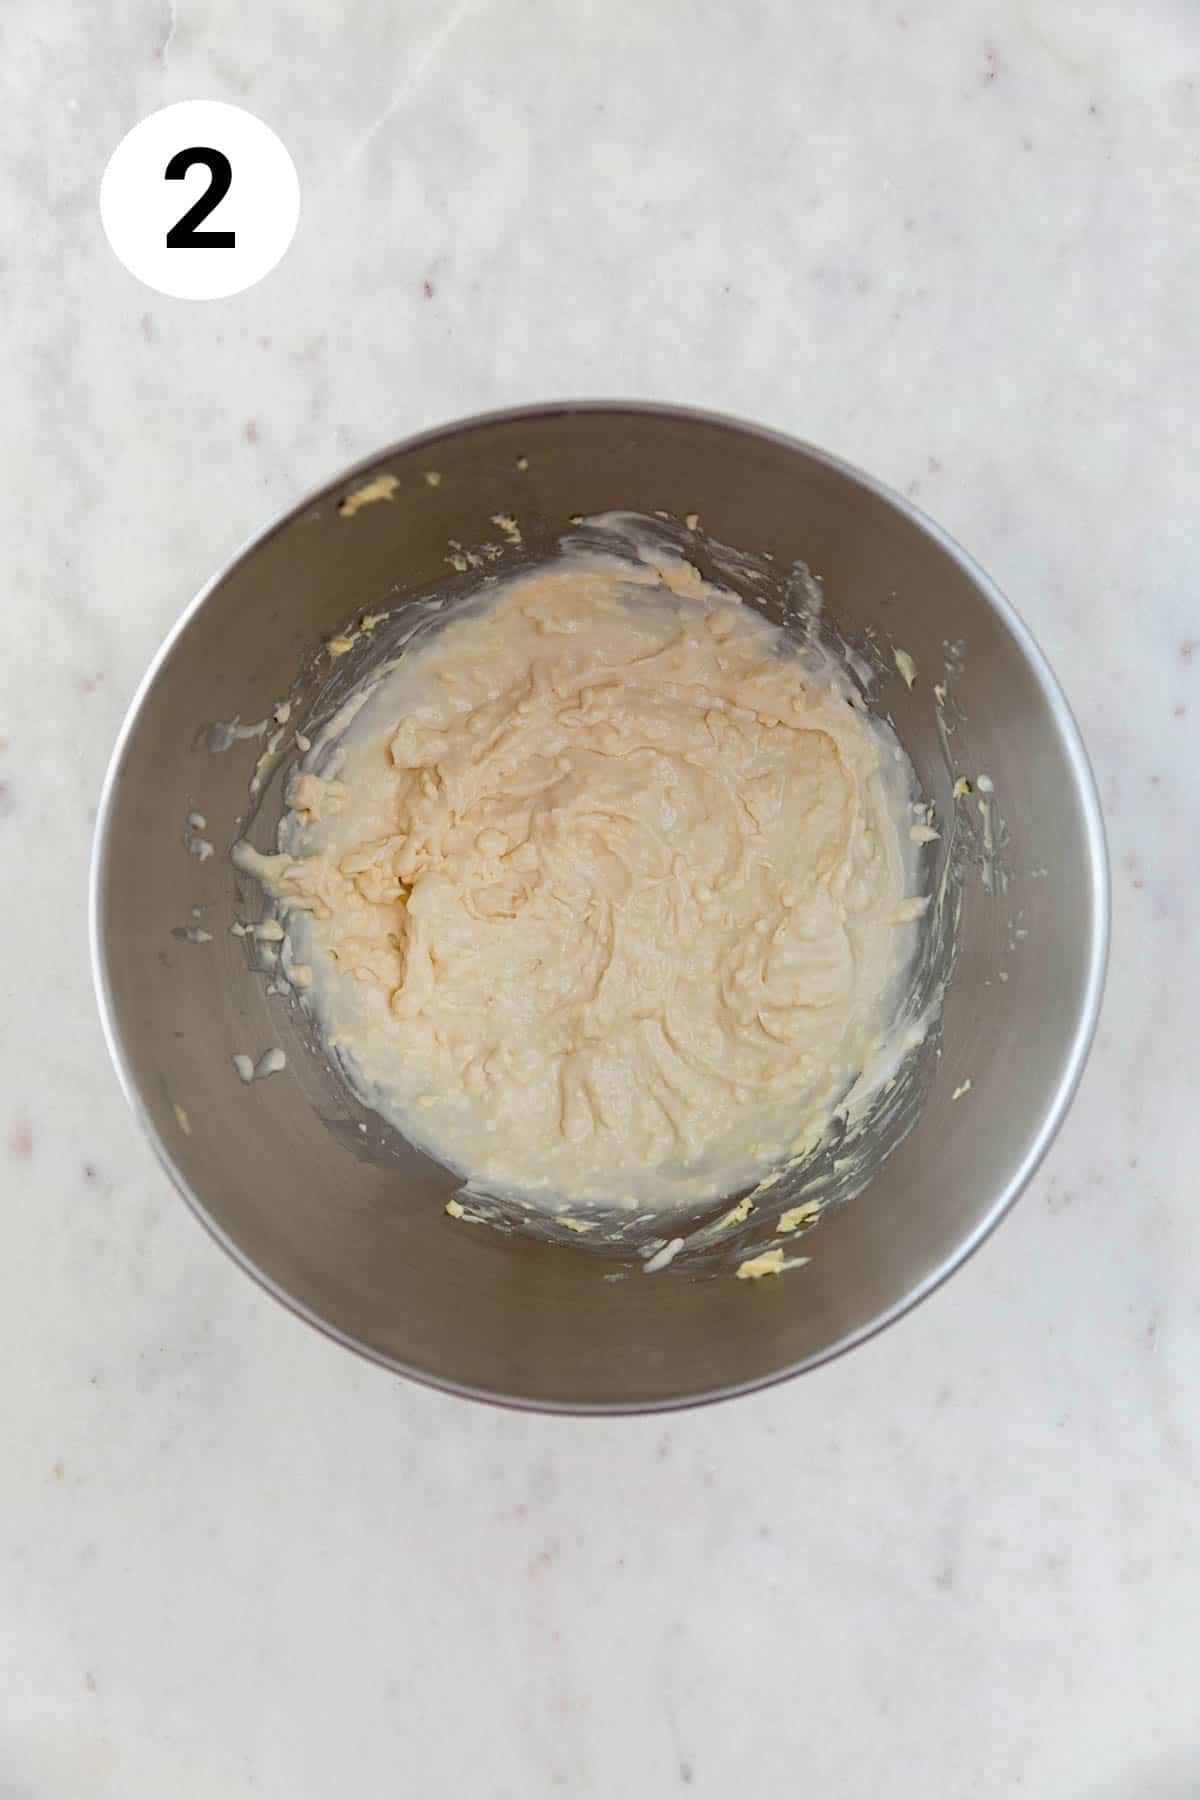 Vegan butter and vegan cream cheese beaten in the bowl of an electric mixer.